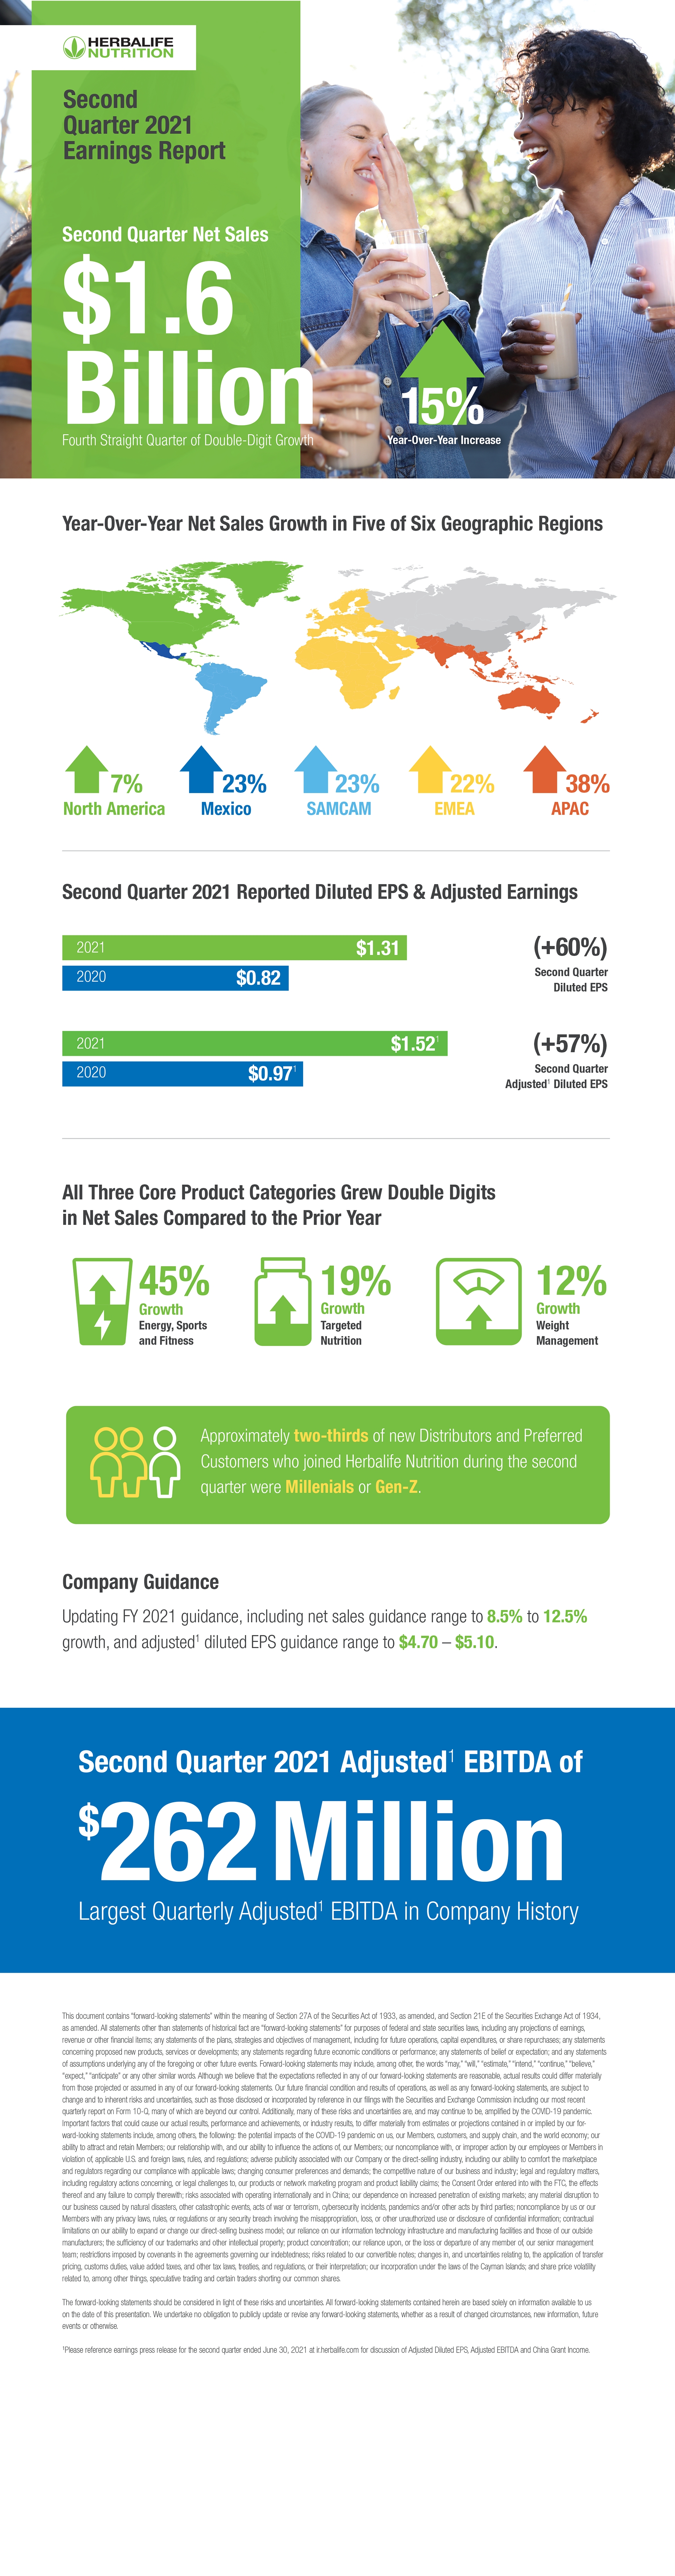 CSRWire - Herbalife Nutrition Launches First Global Responsibility Report